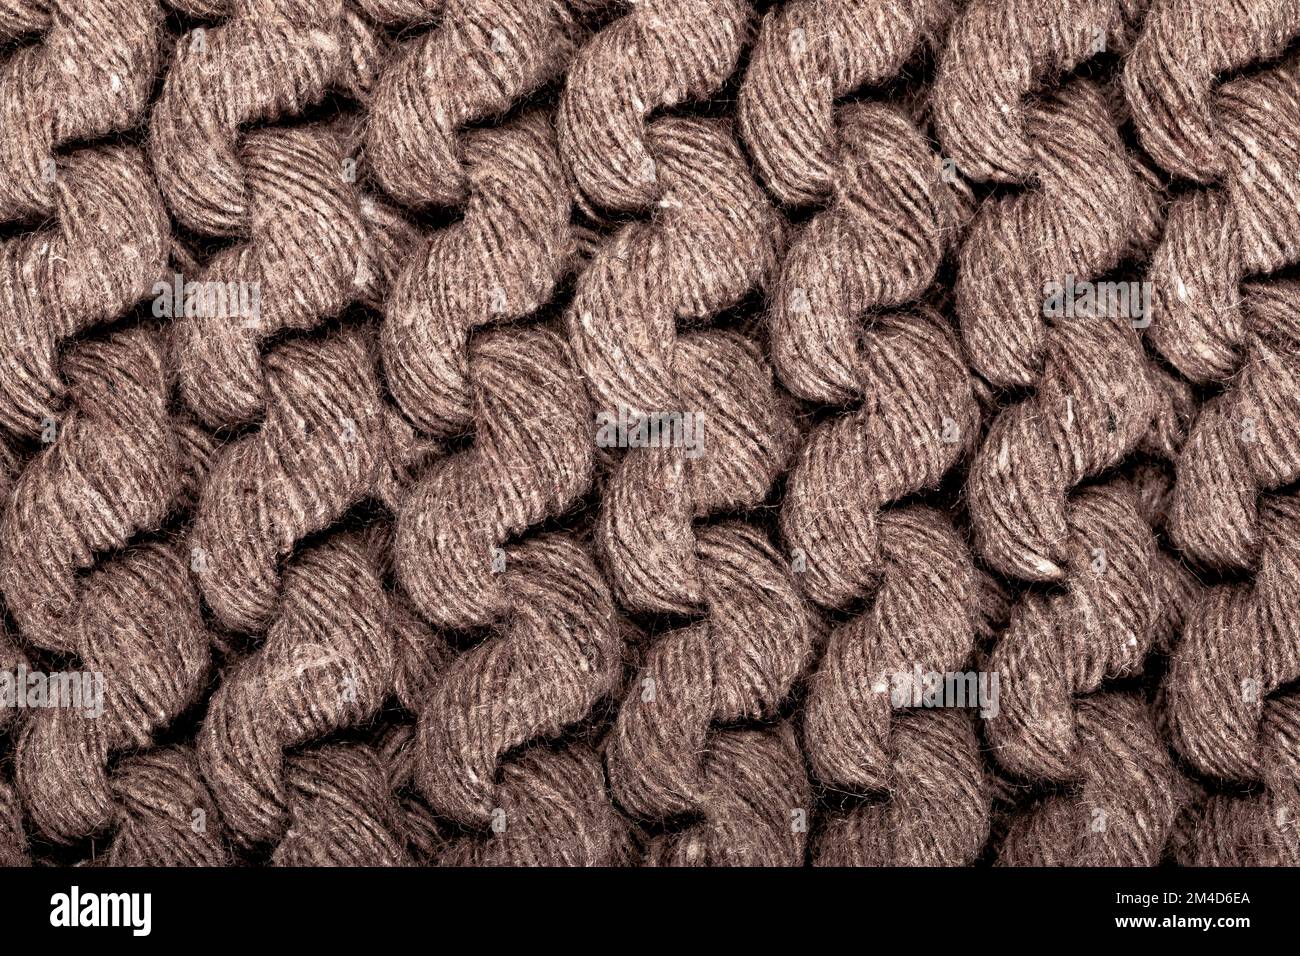 Knit Texture Of Light Natural Wool Knitted Fabric With Cable